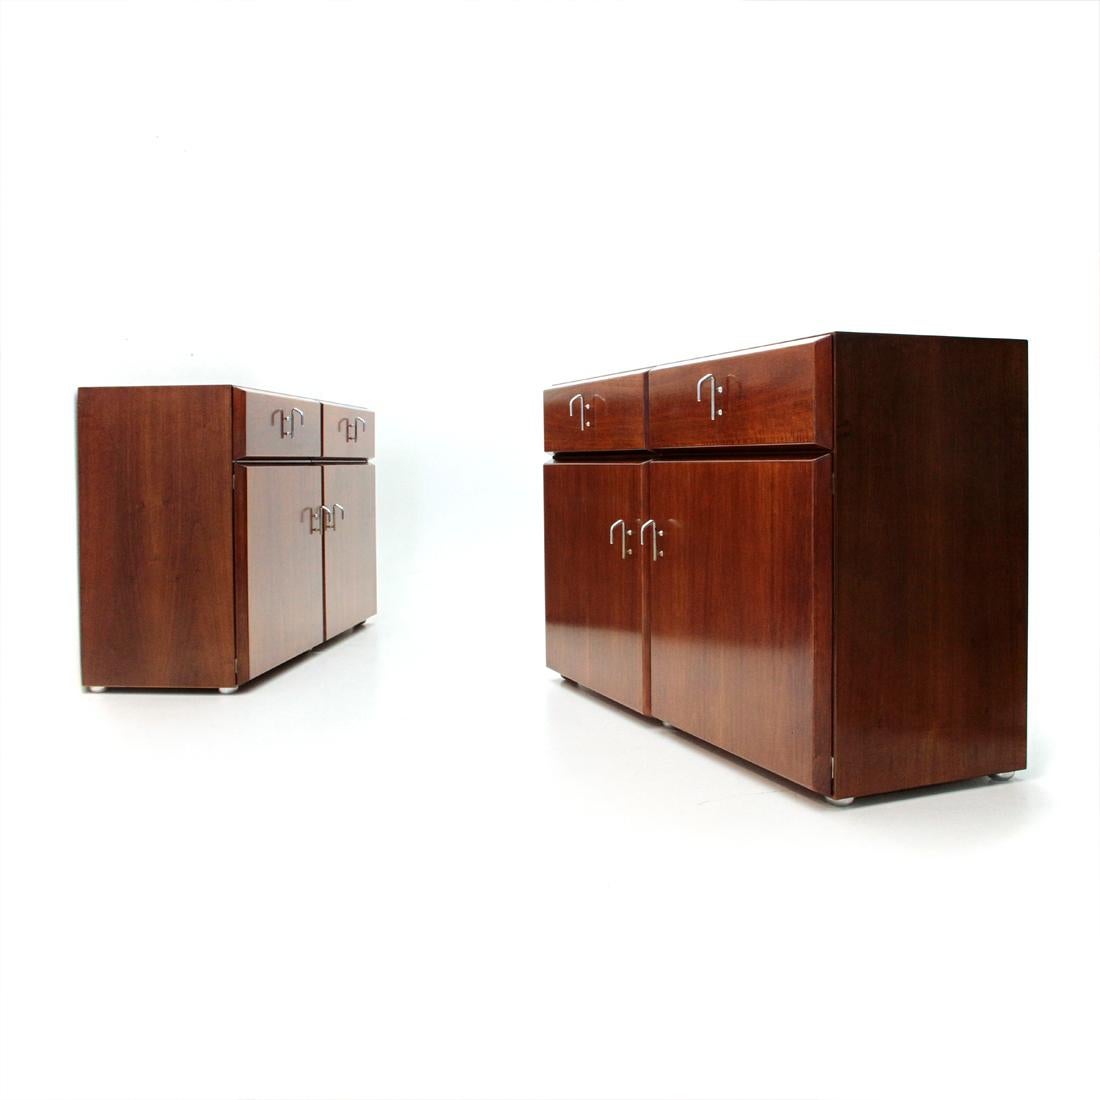 Beliefs produced by Saporiti in the 70s on a design by Vittorio Introini.
Two modules with veneered wood structure.
Drawers in the upper part and storage compartment with doors and internal shelf.
Front edges of drawers and doors cut on